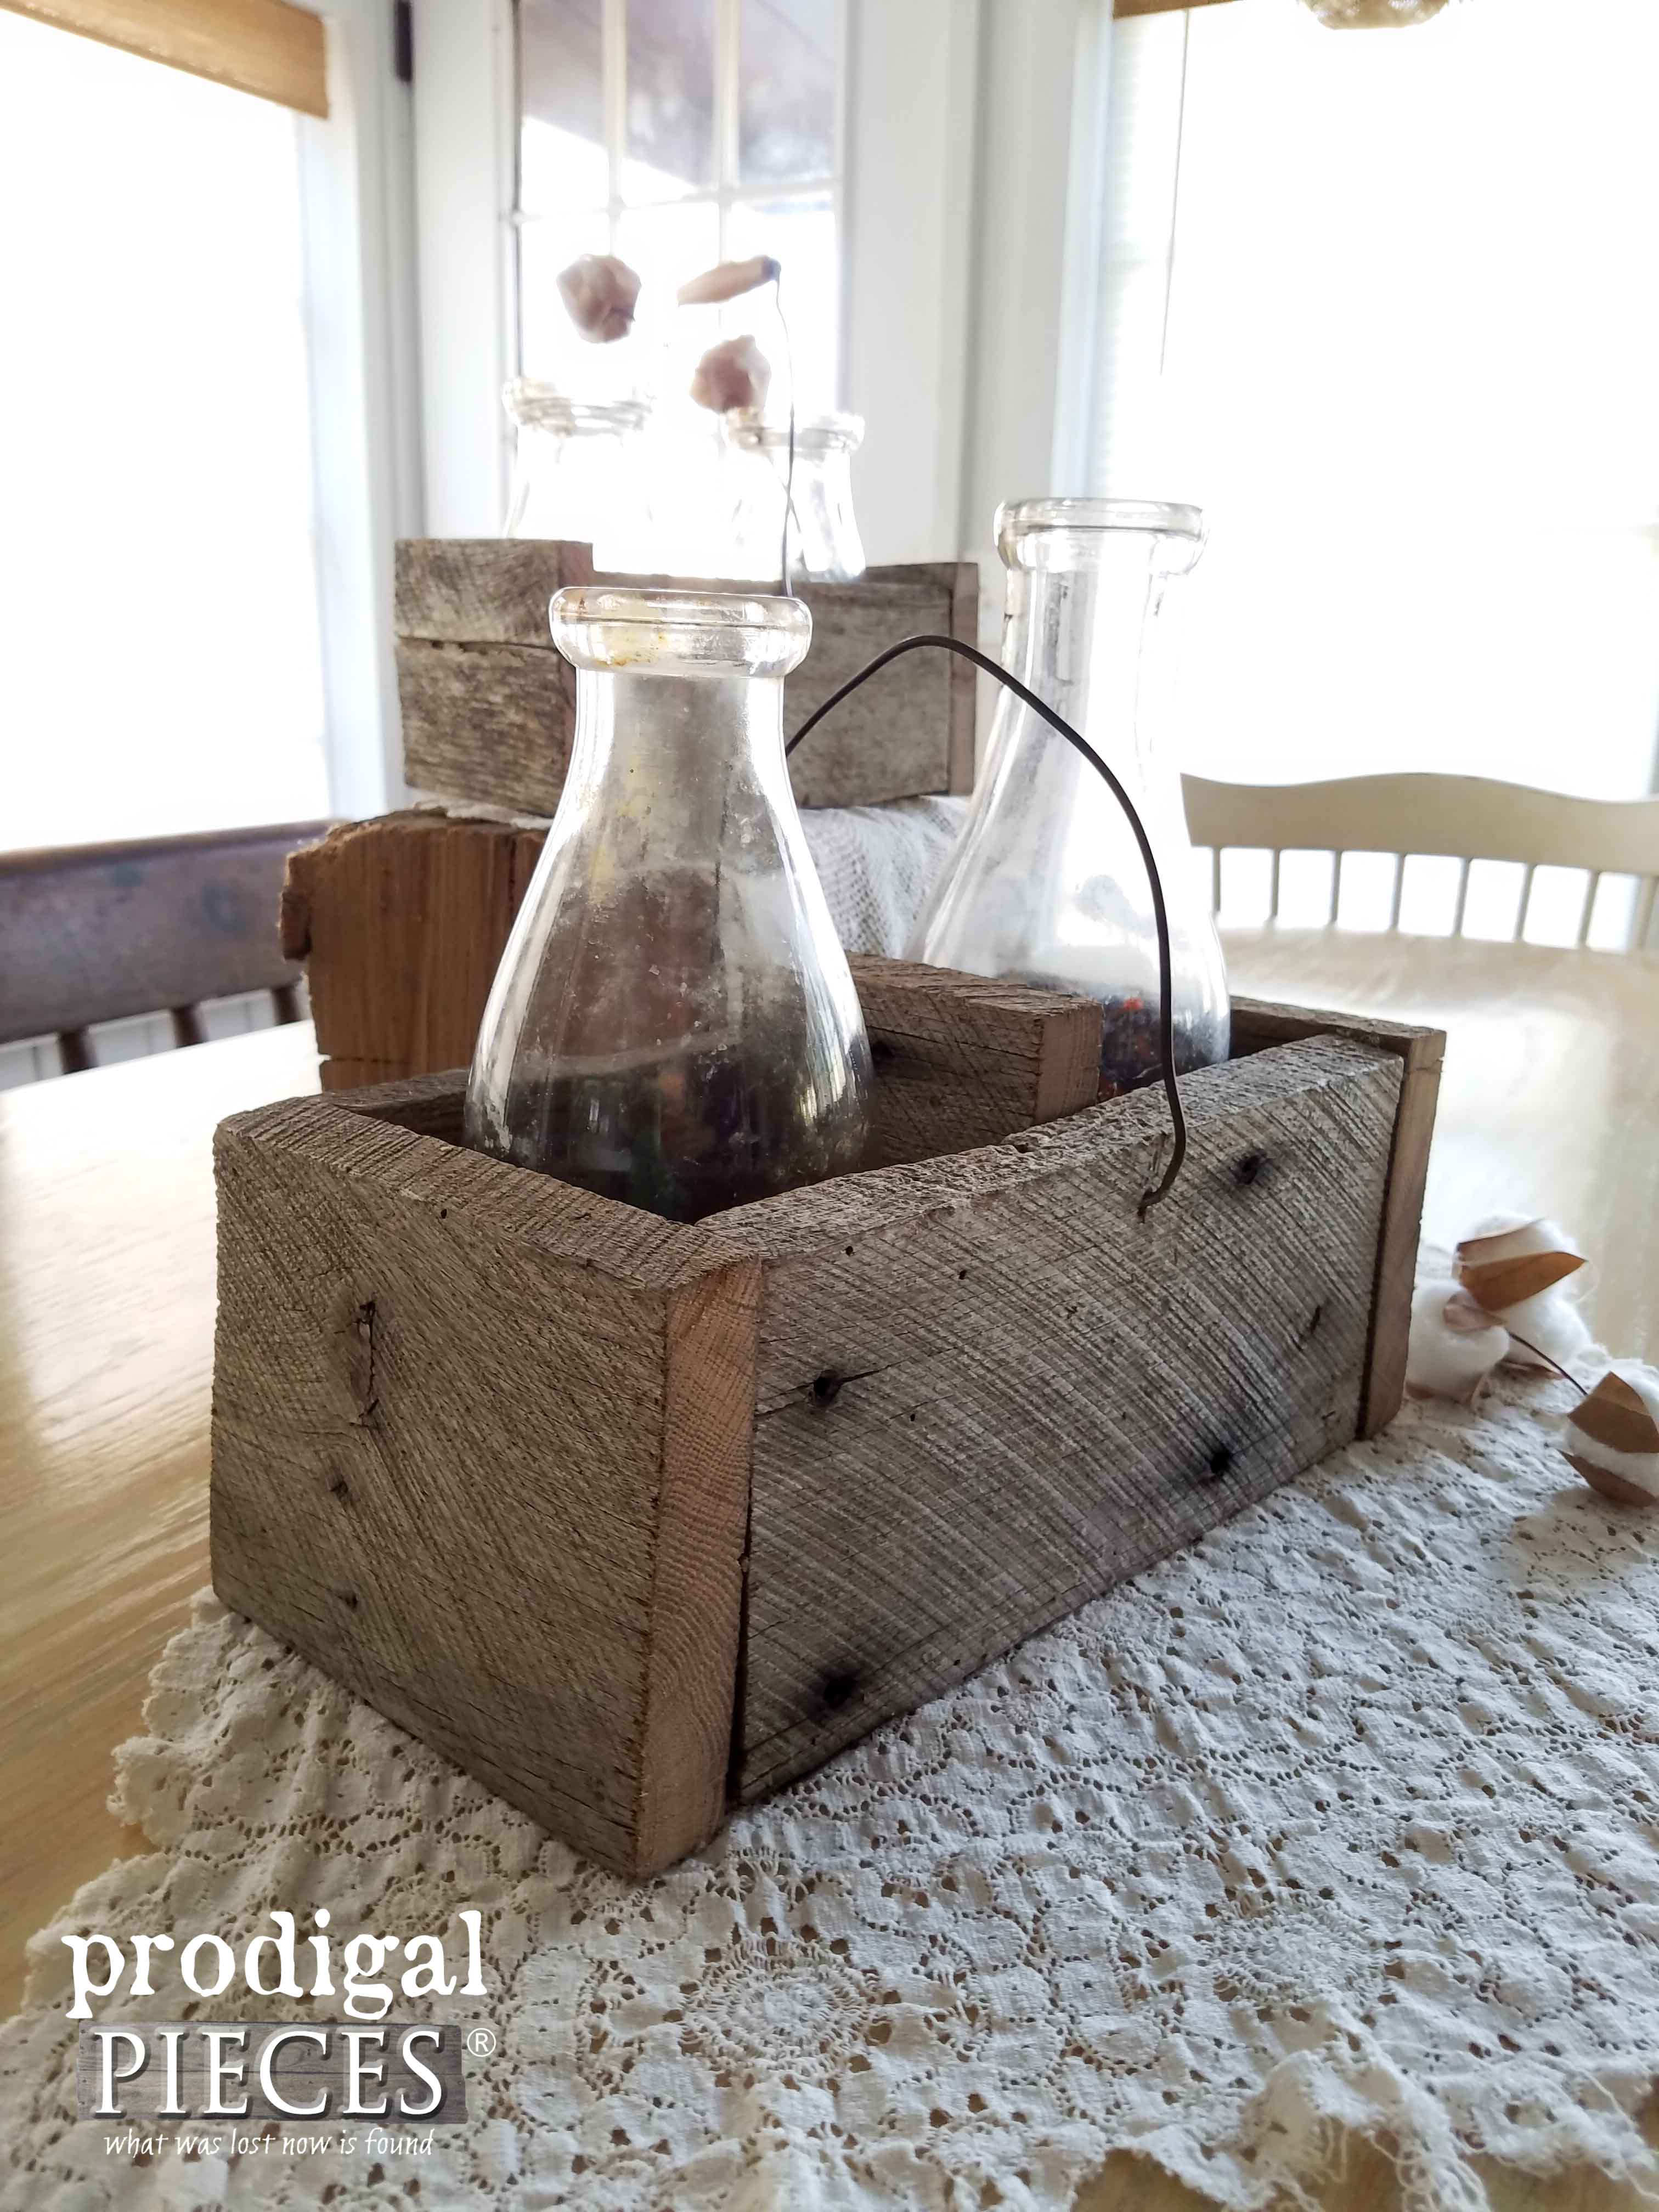 Reclaimed Wooden Caddy Tutorial for any use in your home | Prodigal Pieces | www.prodigalpieces.com